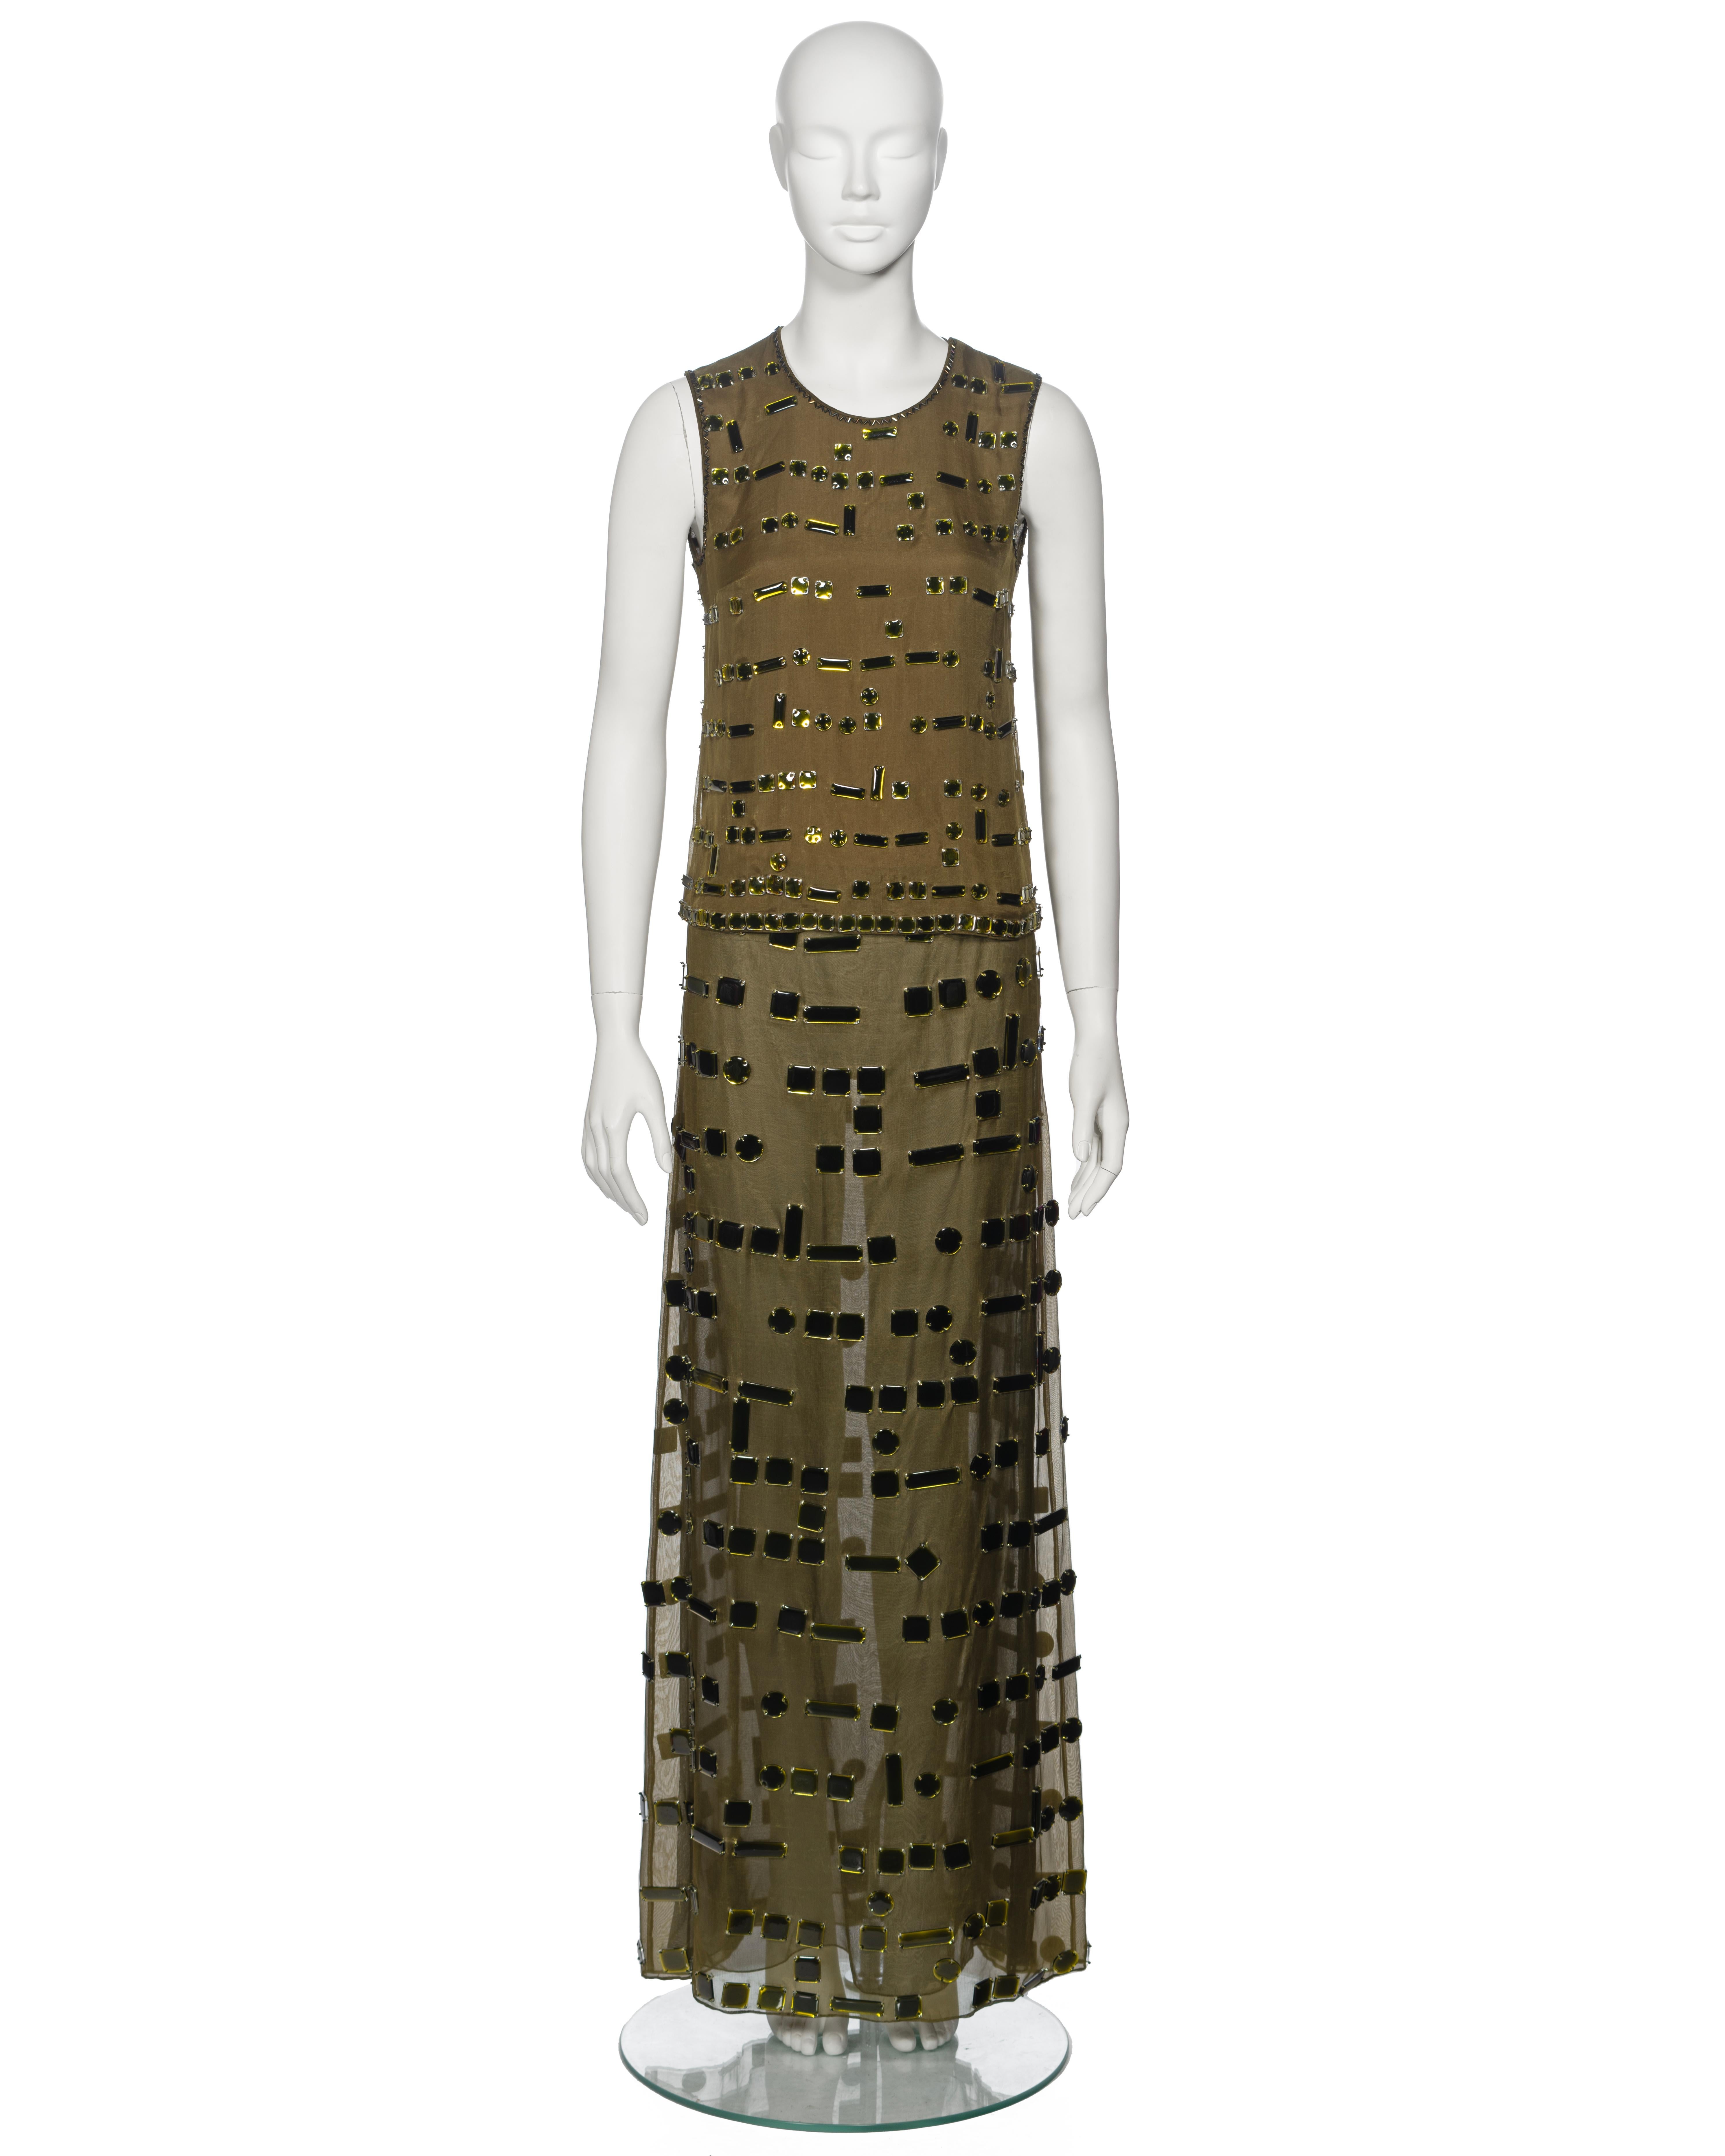 ▪ Archival Prada Embellished Evening Top and Skirt Set
▪ Creative Director: Miuccia Prada
▪ Fall-Winter 1999
▪ Sold by One of a Kind Archive
▪ Constructed from olive green silk organza 
▪ Lavishly embellished with a myriad of glass gems, cut in